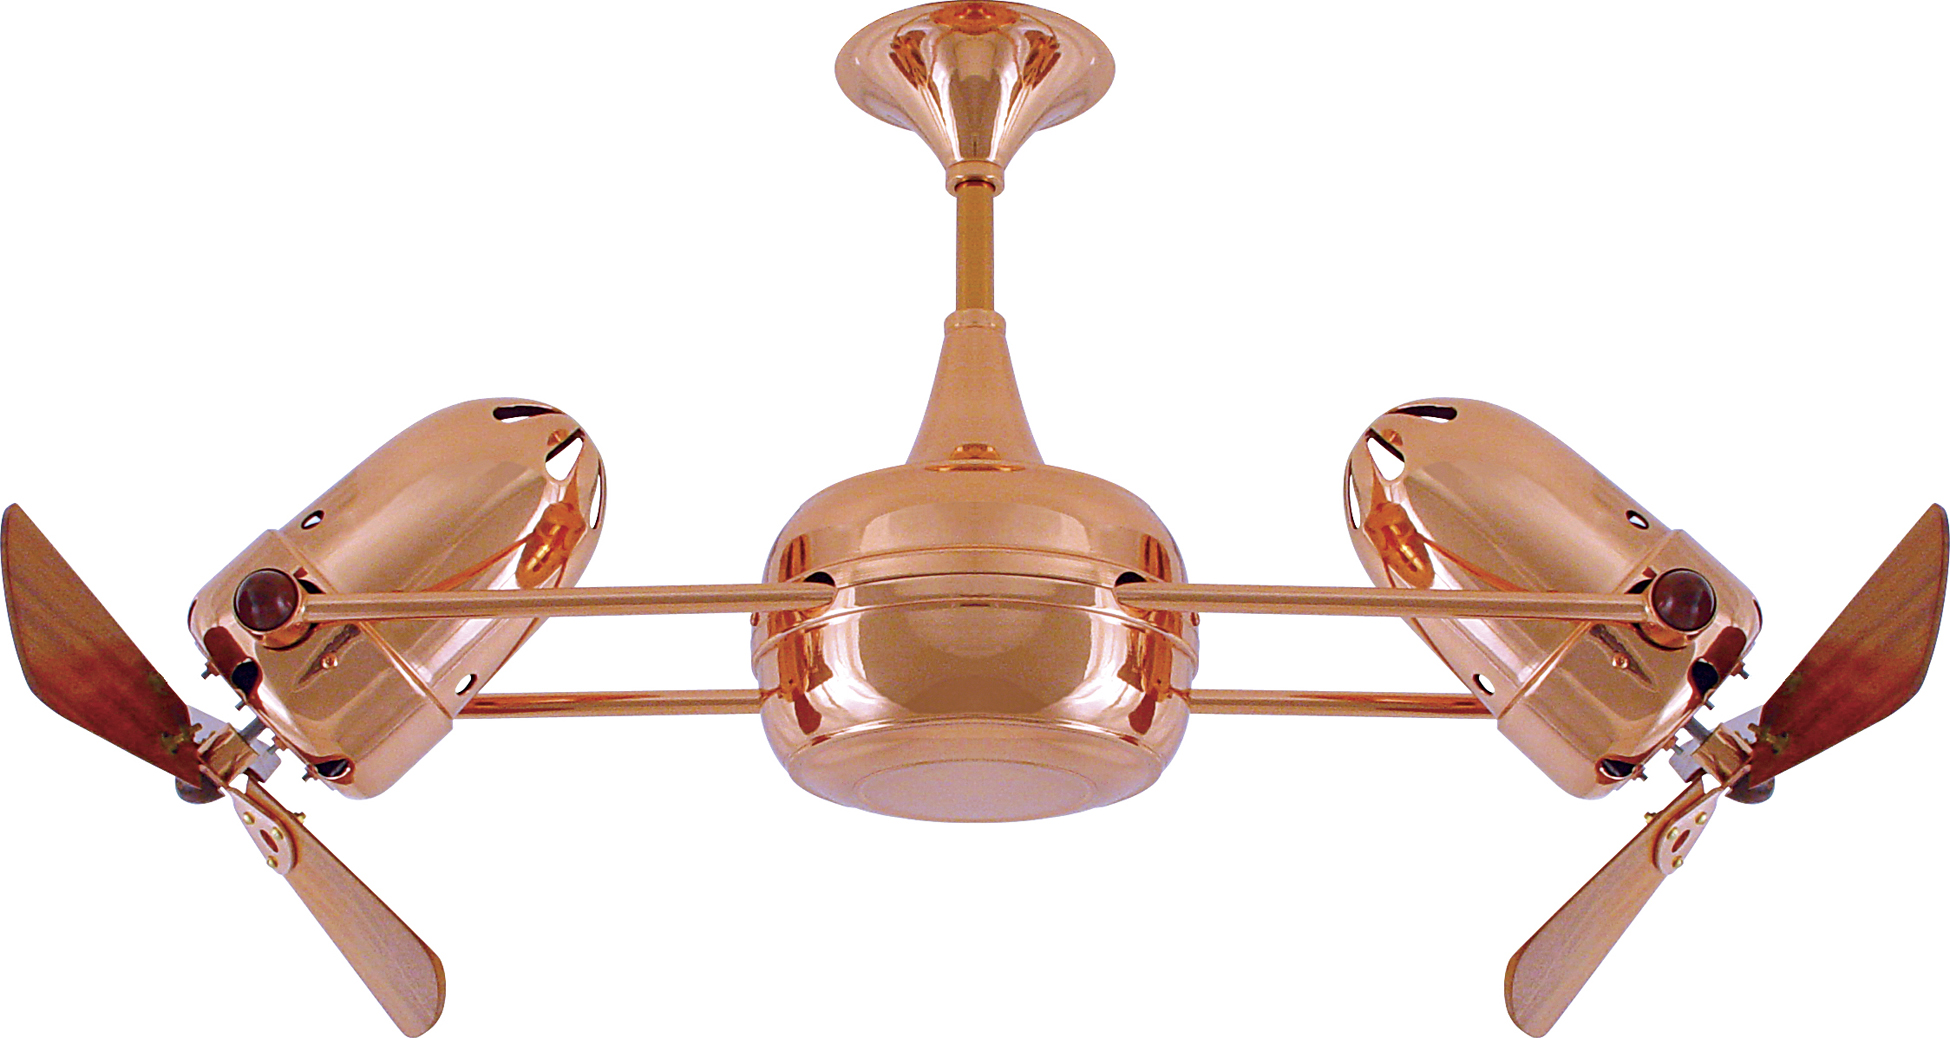 Duplo Dinamico rotational dual head ceiling fan in Polished Copper finish with Mahogany wood blades made by Matthews Fan Company.